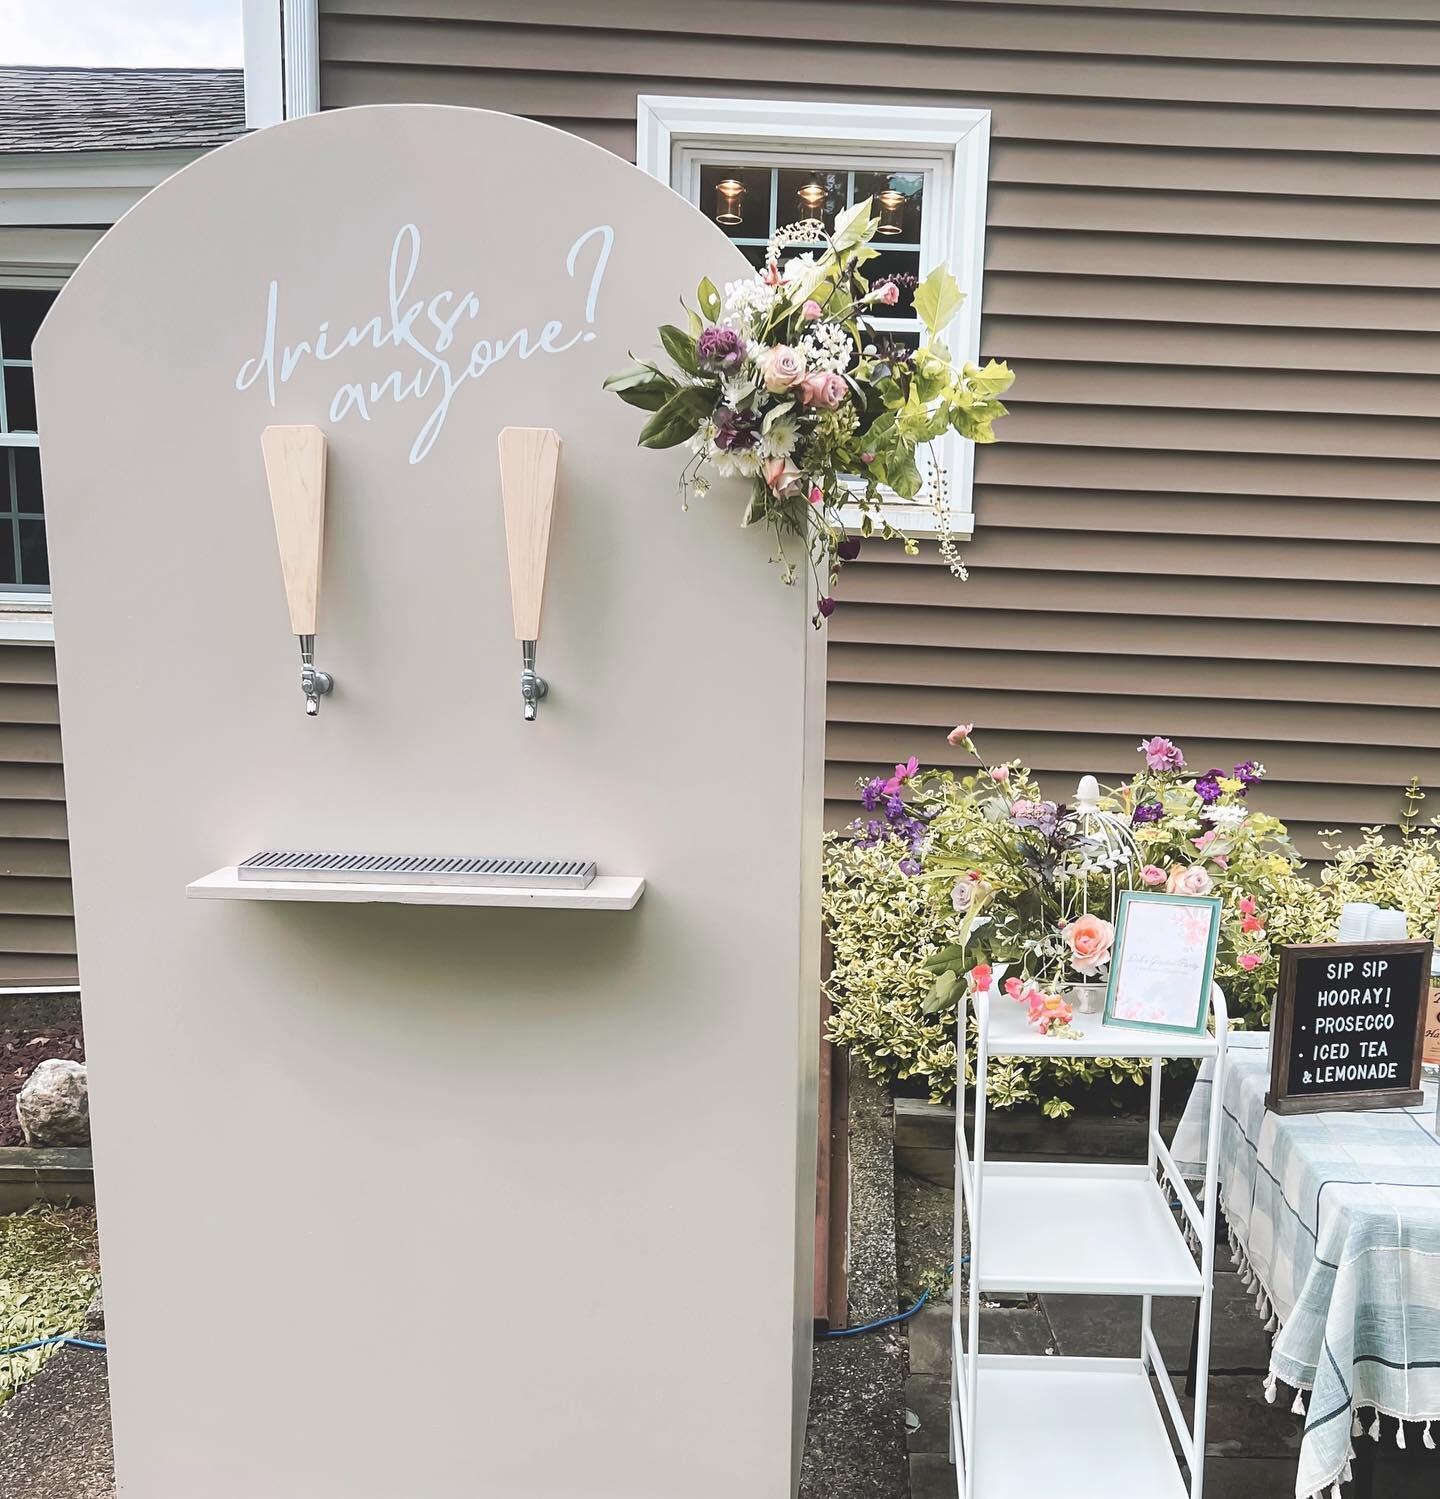 more garden parties please! 🪴🪷
on tap: 
✿ prosecco 
✿ arnold palmer 

add our tiny tap wall to your next summer gathering! plenty of draft and mocktail options for graduations, engagements, wedding showers, rehearsals, birthdays or any reason to ce